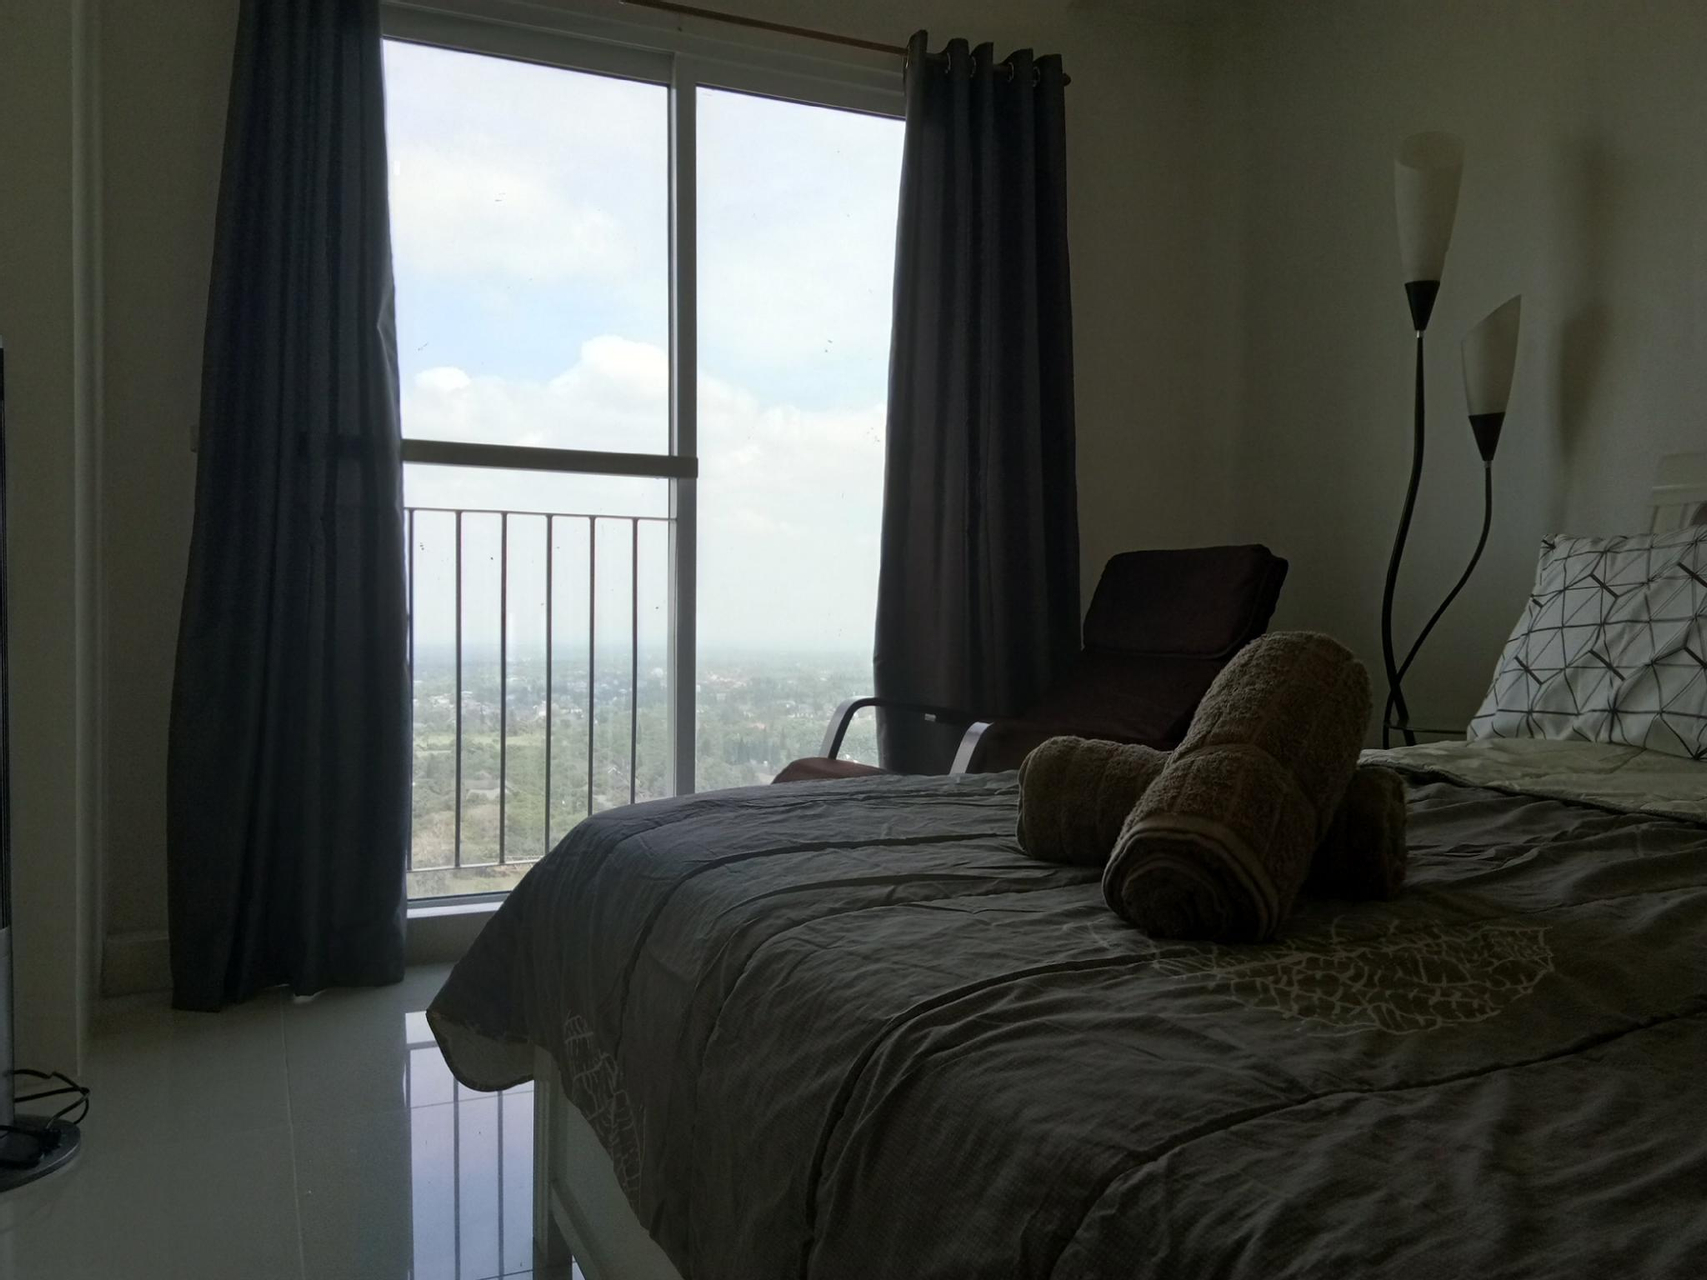 Bedroom, Wind Residences T4 Unit 2106 by SMCo, Tagaytay City